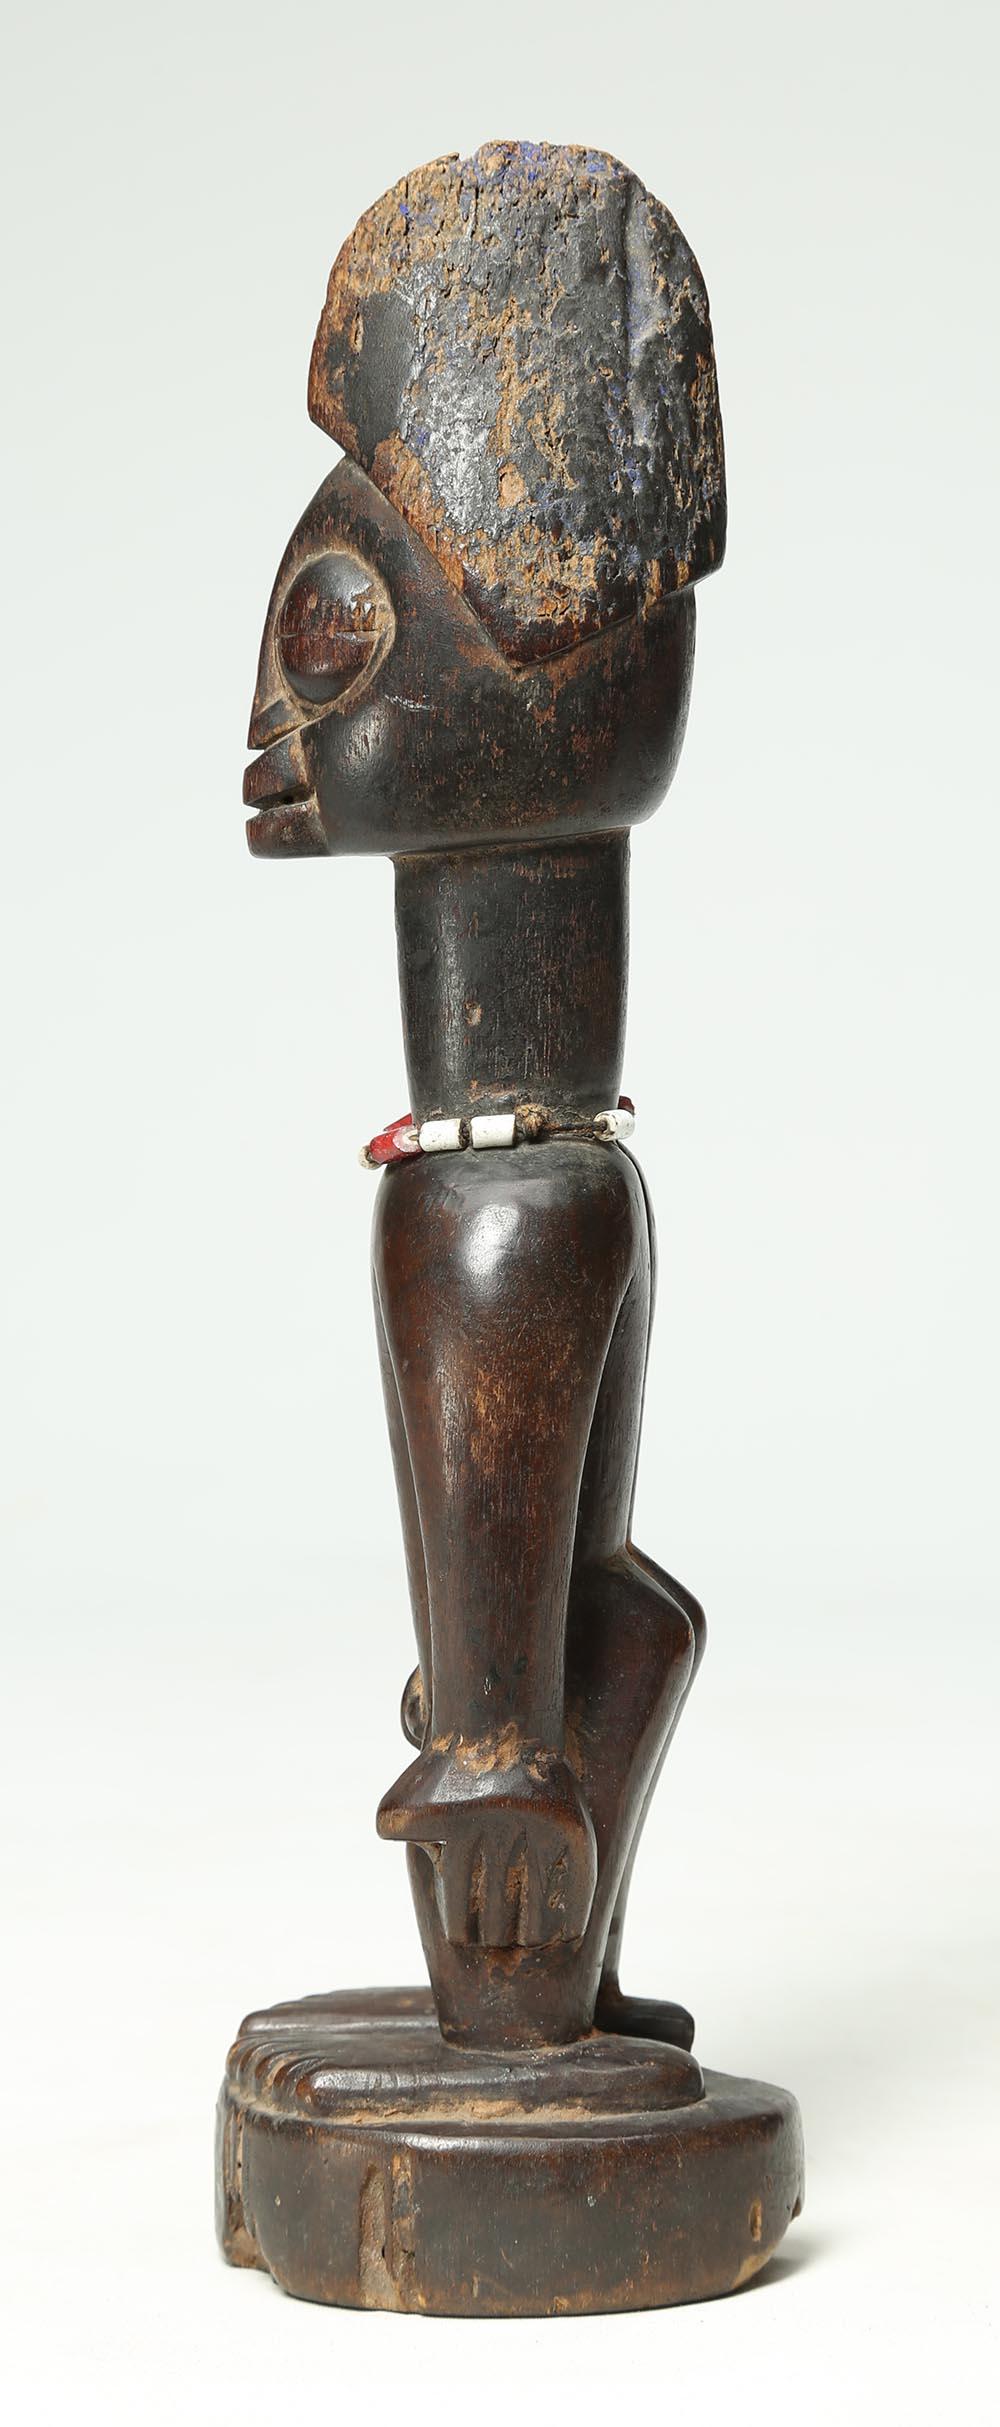 Yoruba tribal male figure, an Ibeji or twin figure, Nigeria, Africa, large eyes

A finely carved Yoruba Male Ibeji figure with pointed headdress, large expressive eyes on a circular base with heavy wear and polish from native use, Glass bead